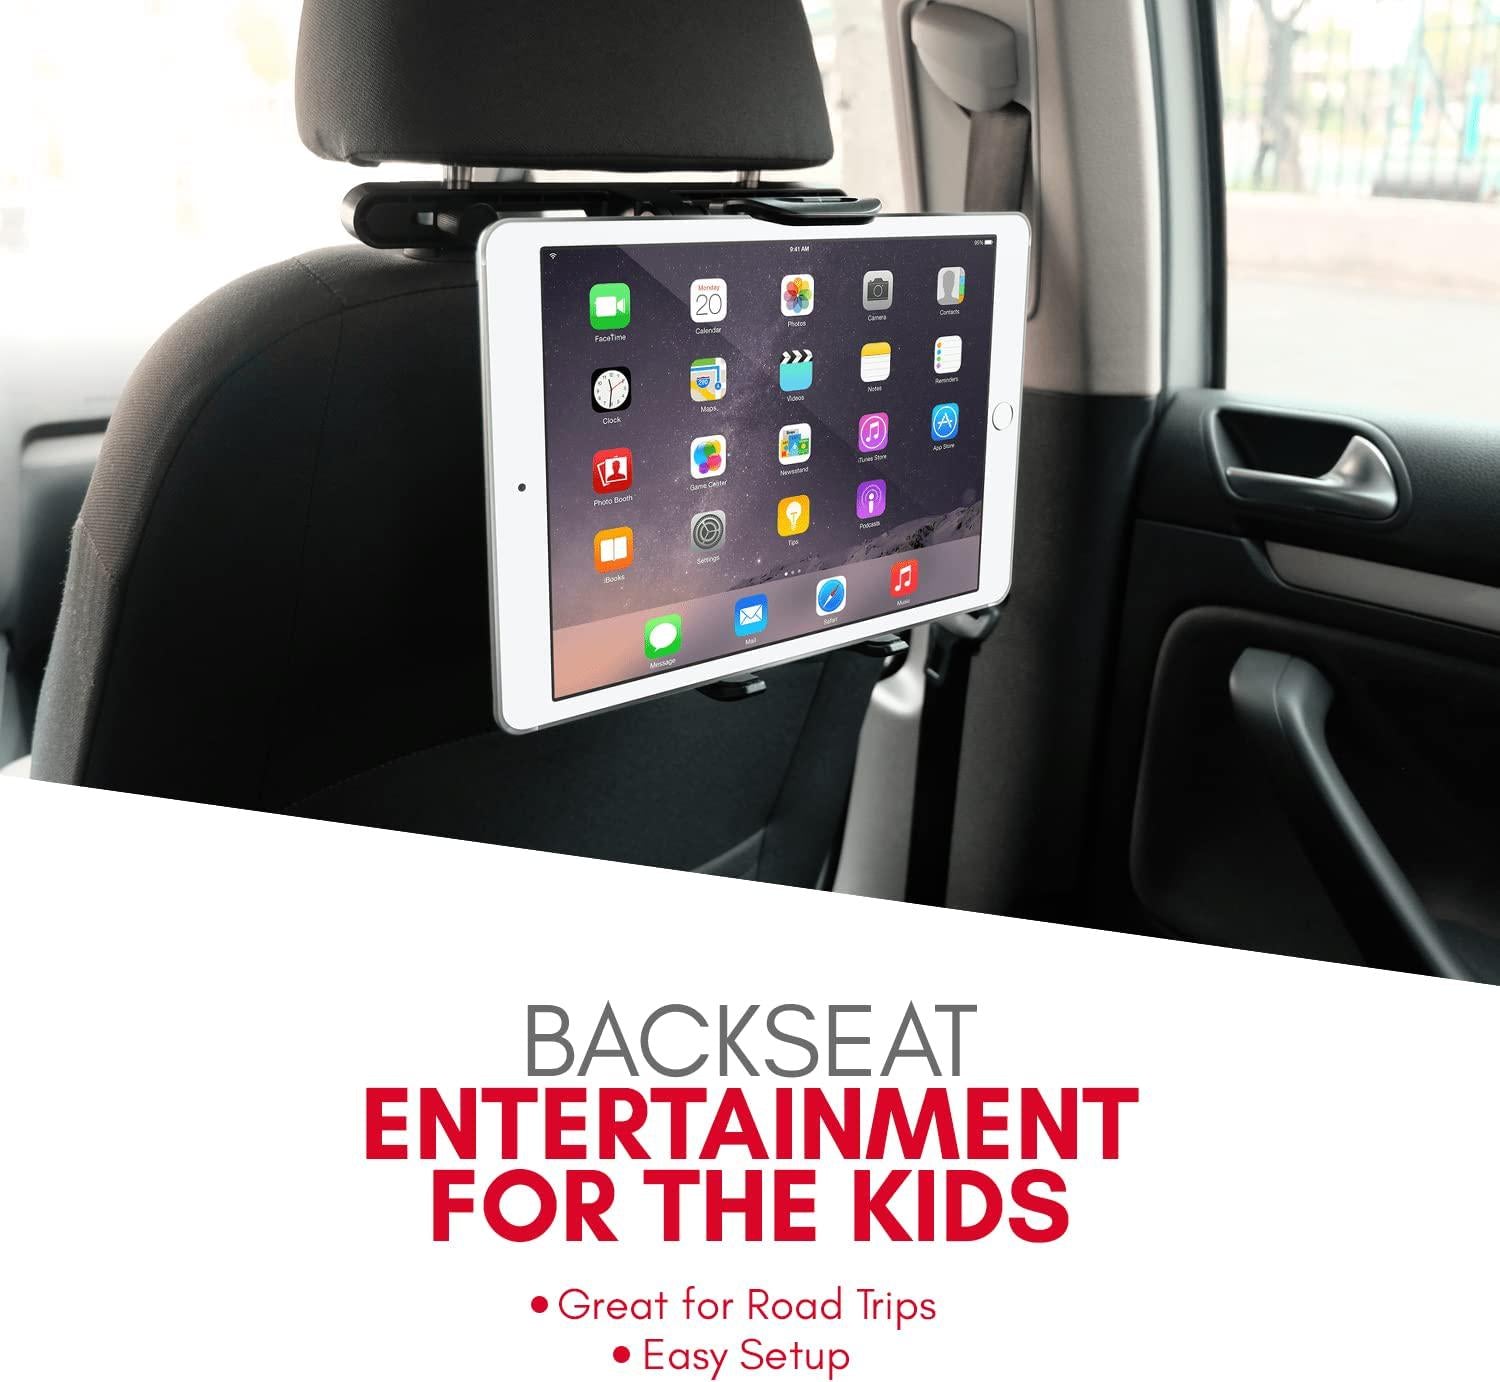 Macally, Macally Car Headrest Tablet Holder, Adjustable iPad Car Mount for Kids in Backseat, Compatible with Devices Such as iPad Pro Air Mini, Galaxy Tabs, and 7 to 10 Tablets and Cell Phones - Black